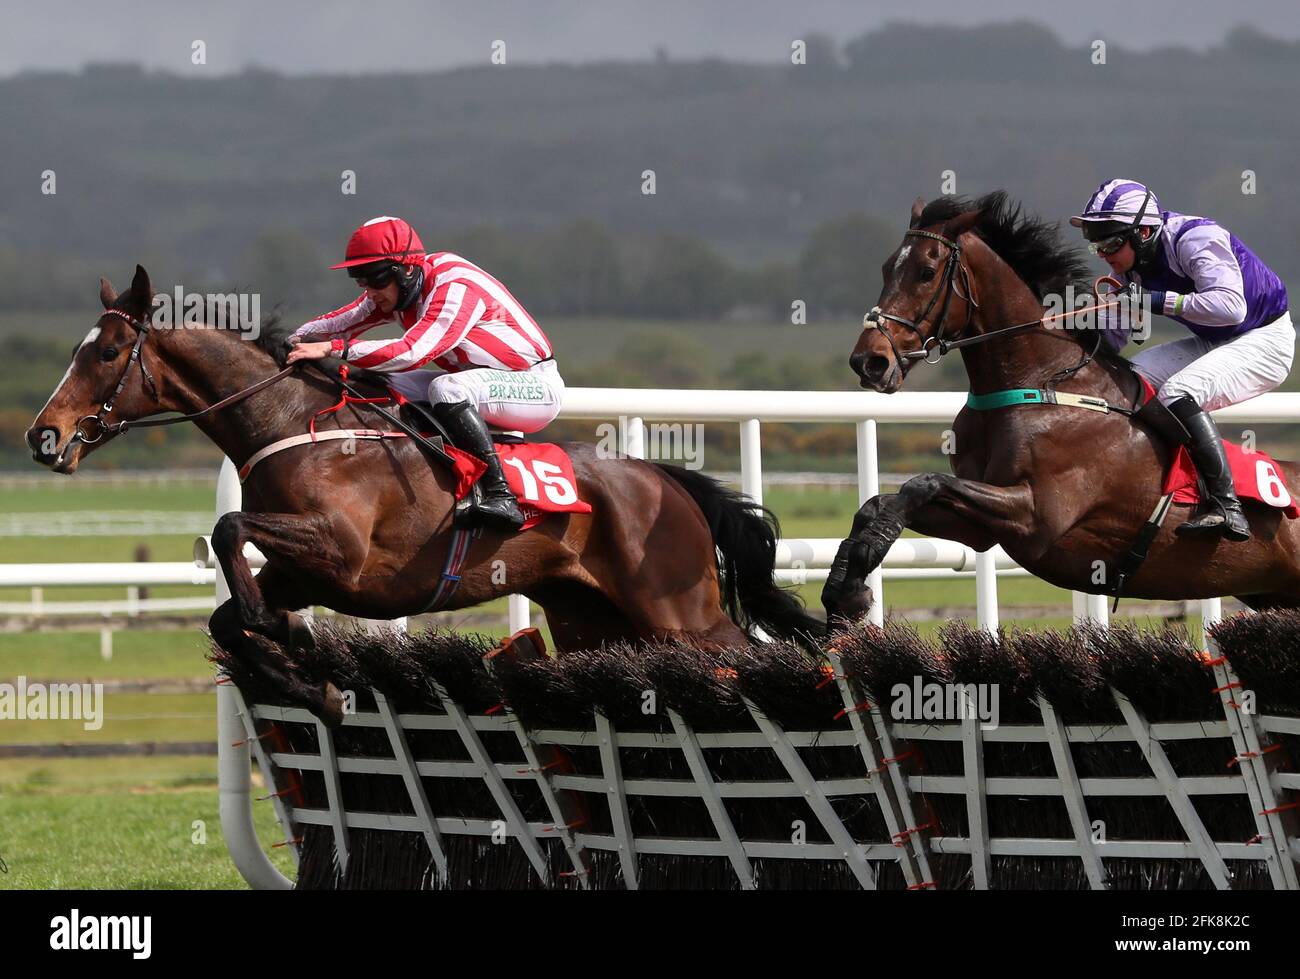 Cathal Landers riding Jiving Jerry (left) on their way to winning the Specialist Joinery Group Handicap Hurdle during Day Three of the Punchestown Festival at Punchestown Racecourse in County Kildare, Ireland. Issue date: Thursday April 29, 2021. Stock Photo